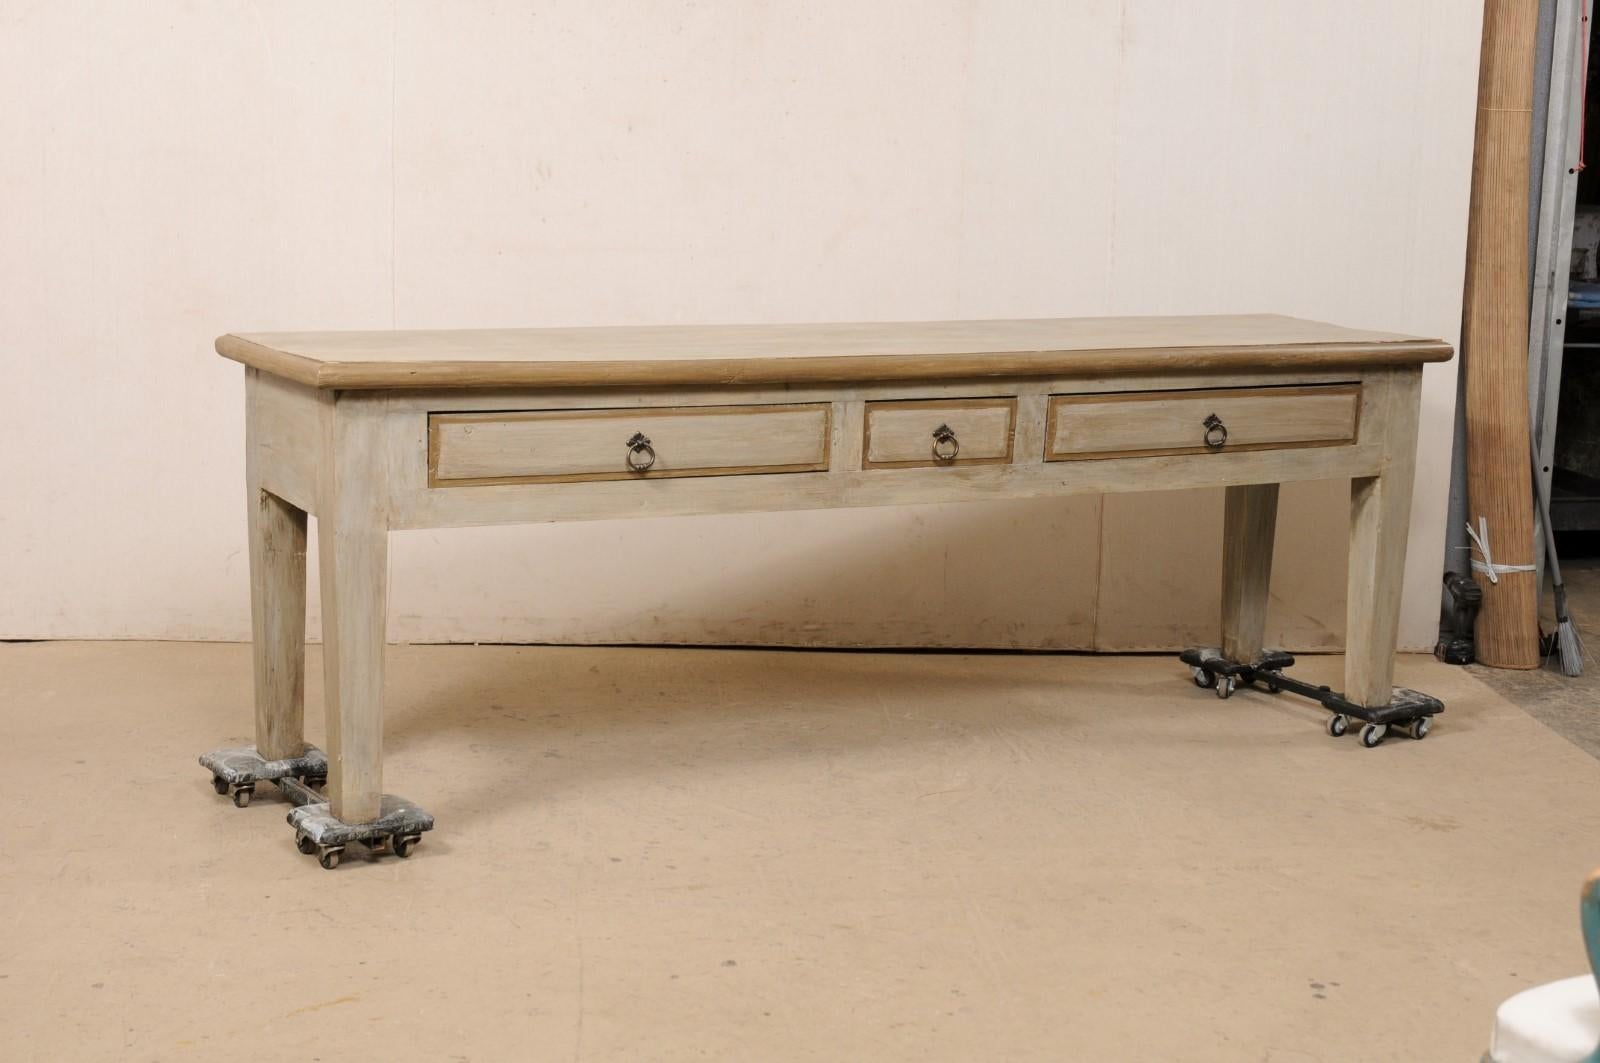 A large console table, which has been fashioned from old reclaimed wood from Brazil. This table has been designed in simple, clean lines. Its slightly overhanging, rectangular-shaped top, approximately 8.5+ foot long, rests atop an apron which